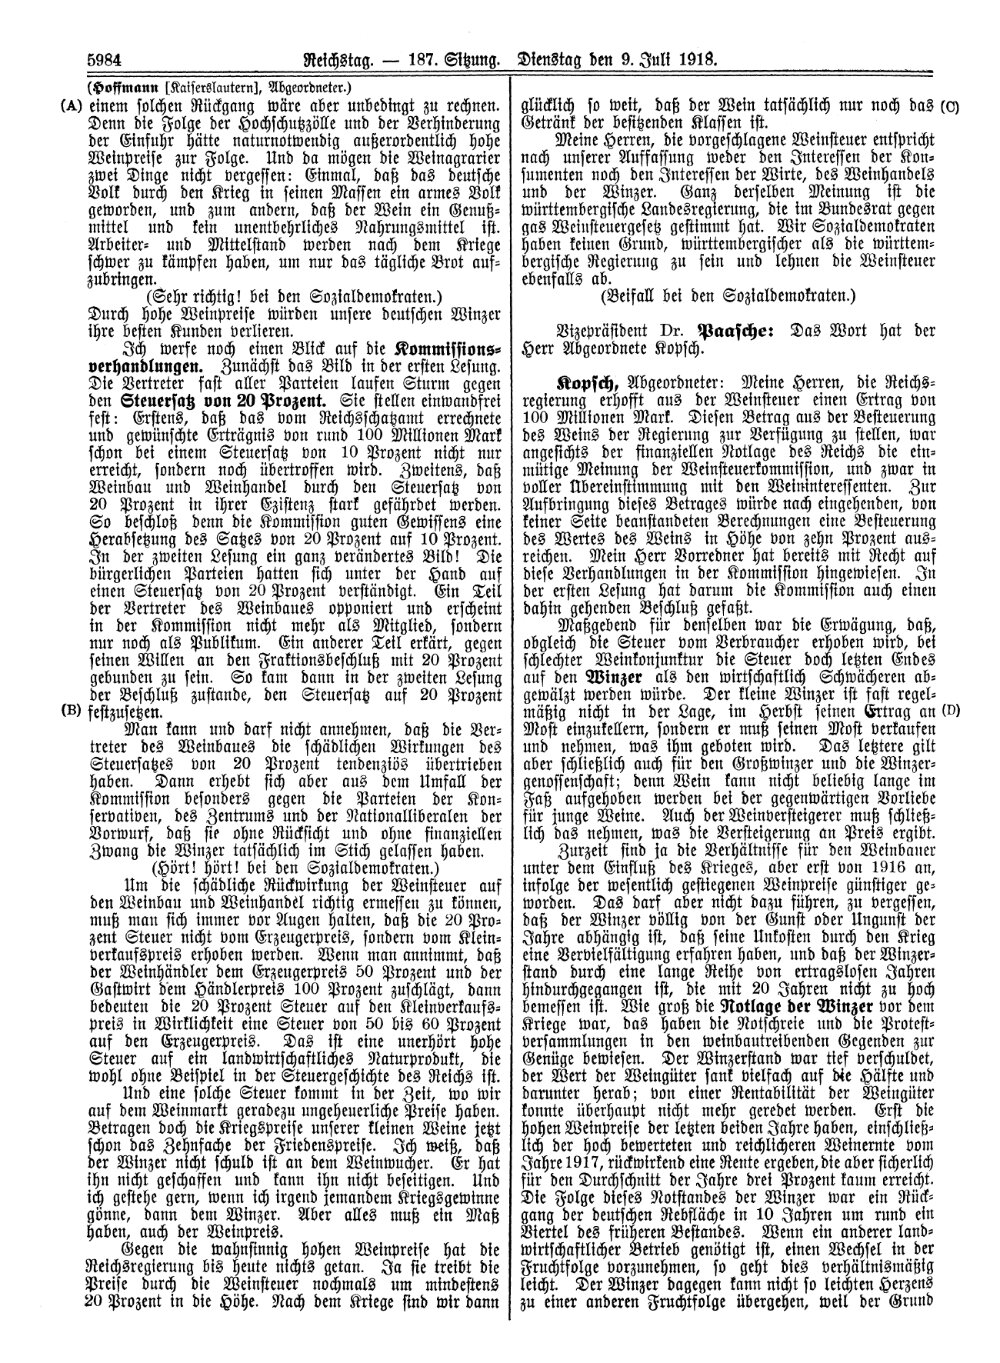 Scan of page 5984